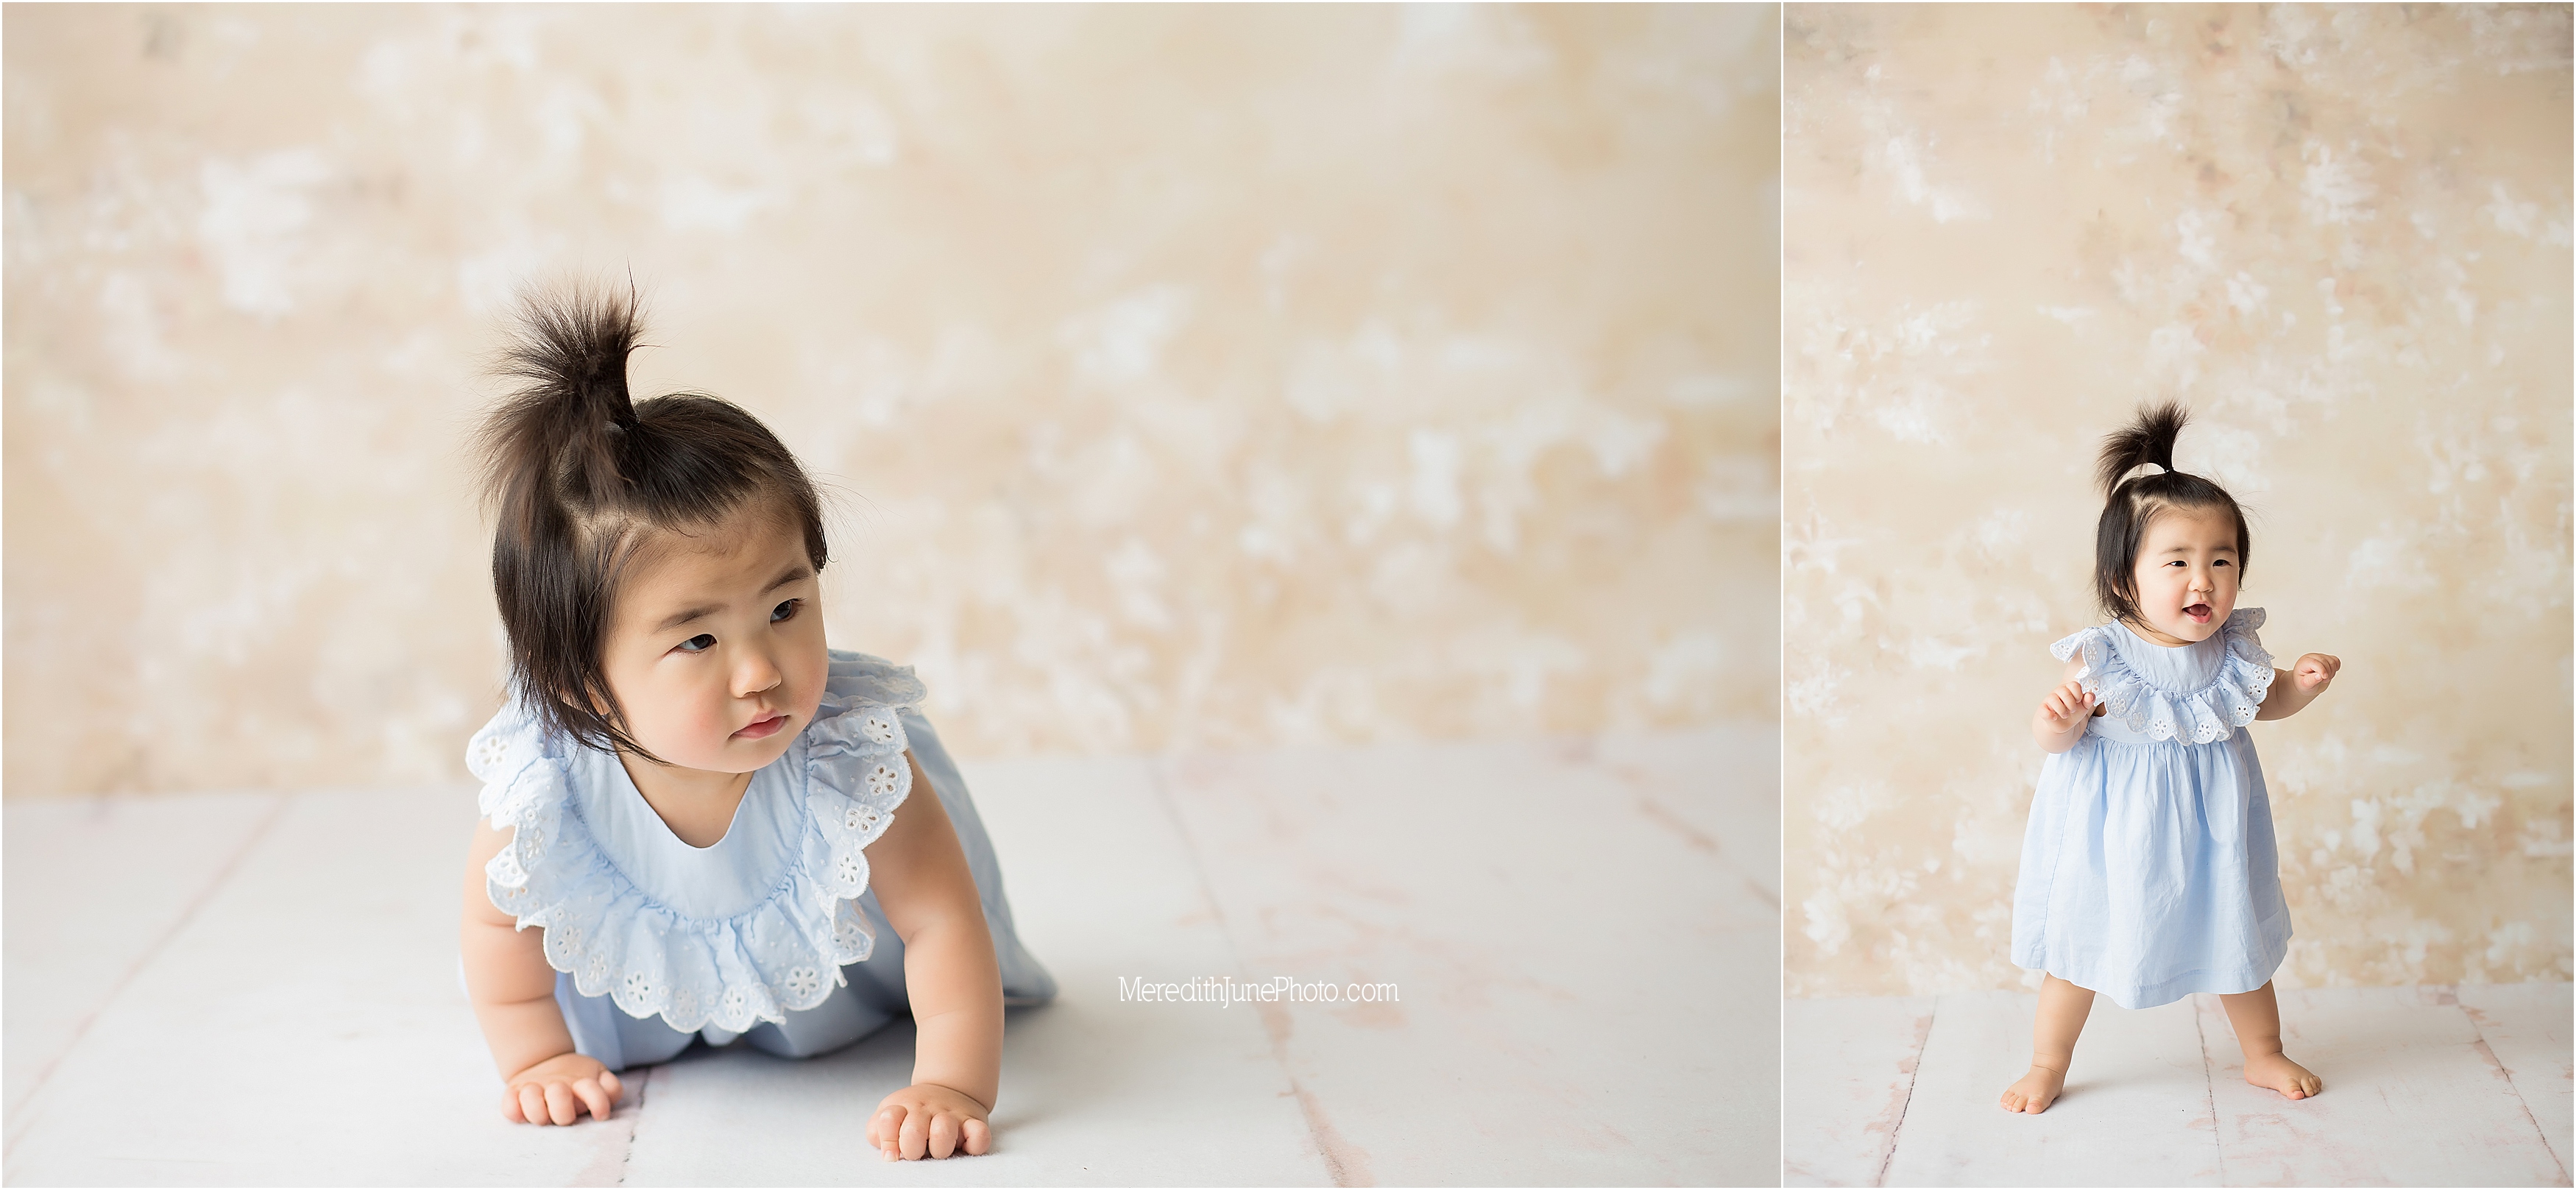 First birthday photo session